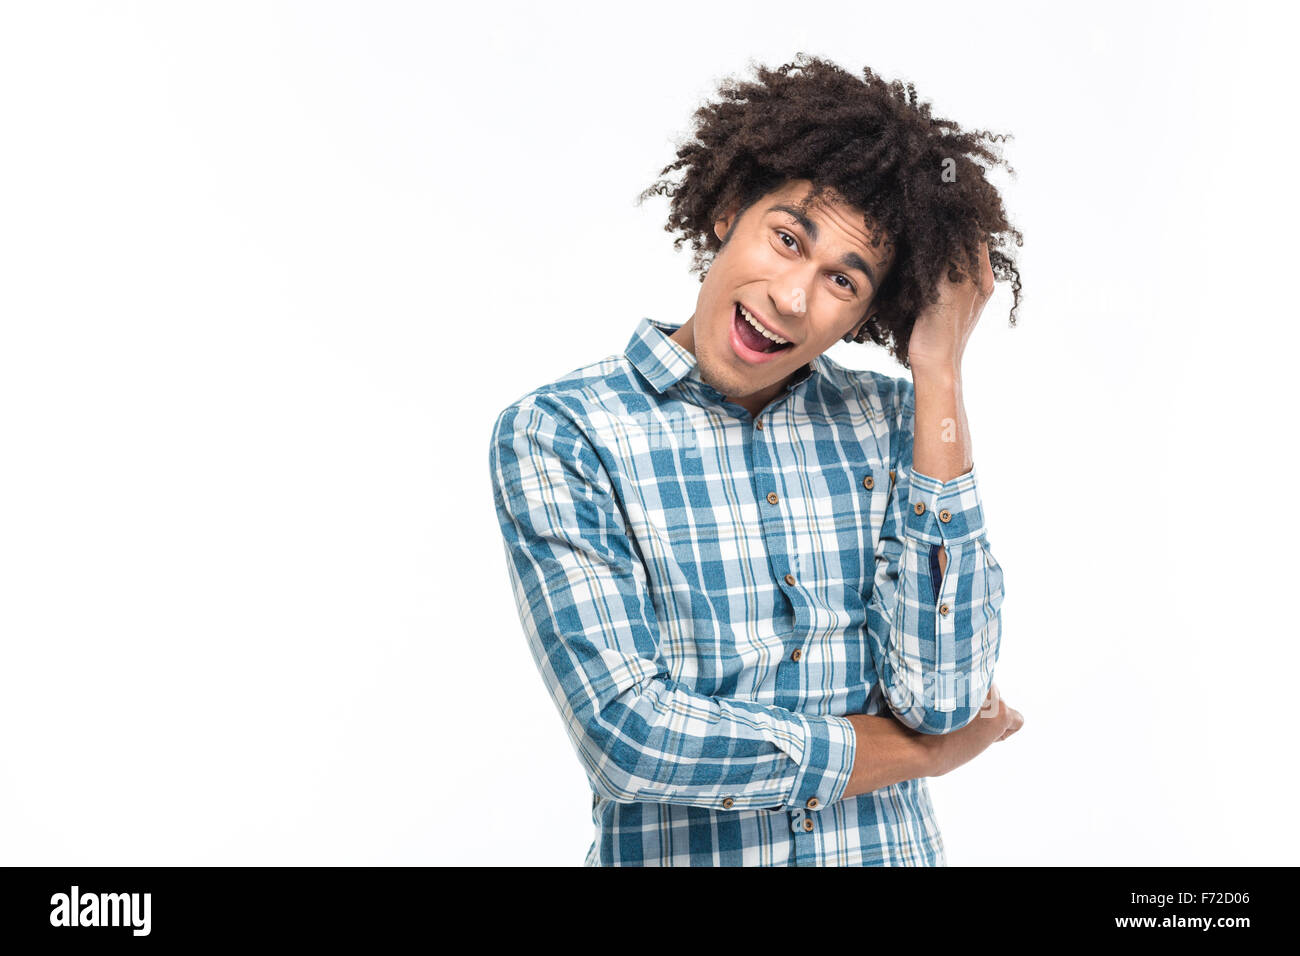 Portrait of a cheerful afro american man with curly hair looking at camera isolated on a white background Stock Photo